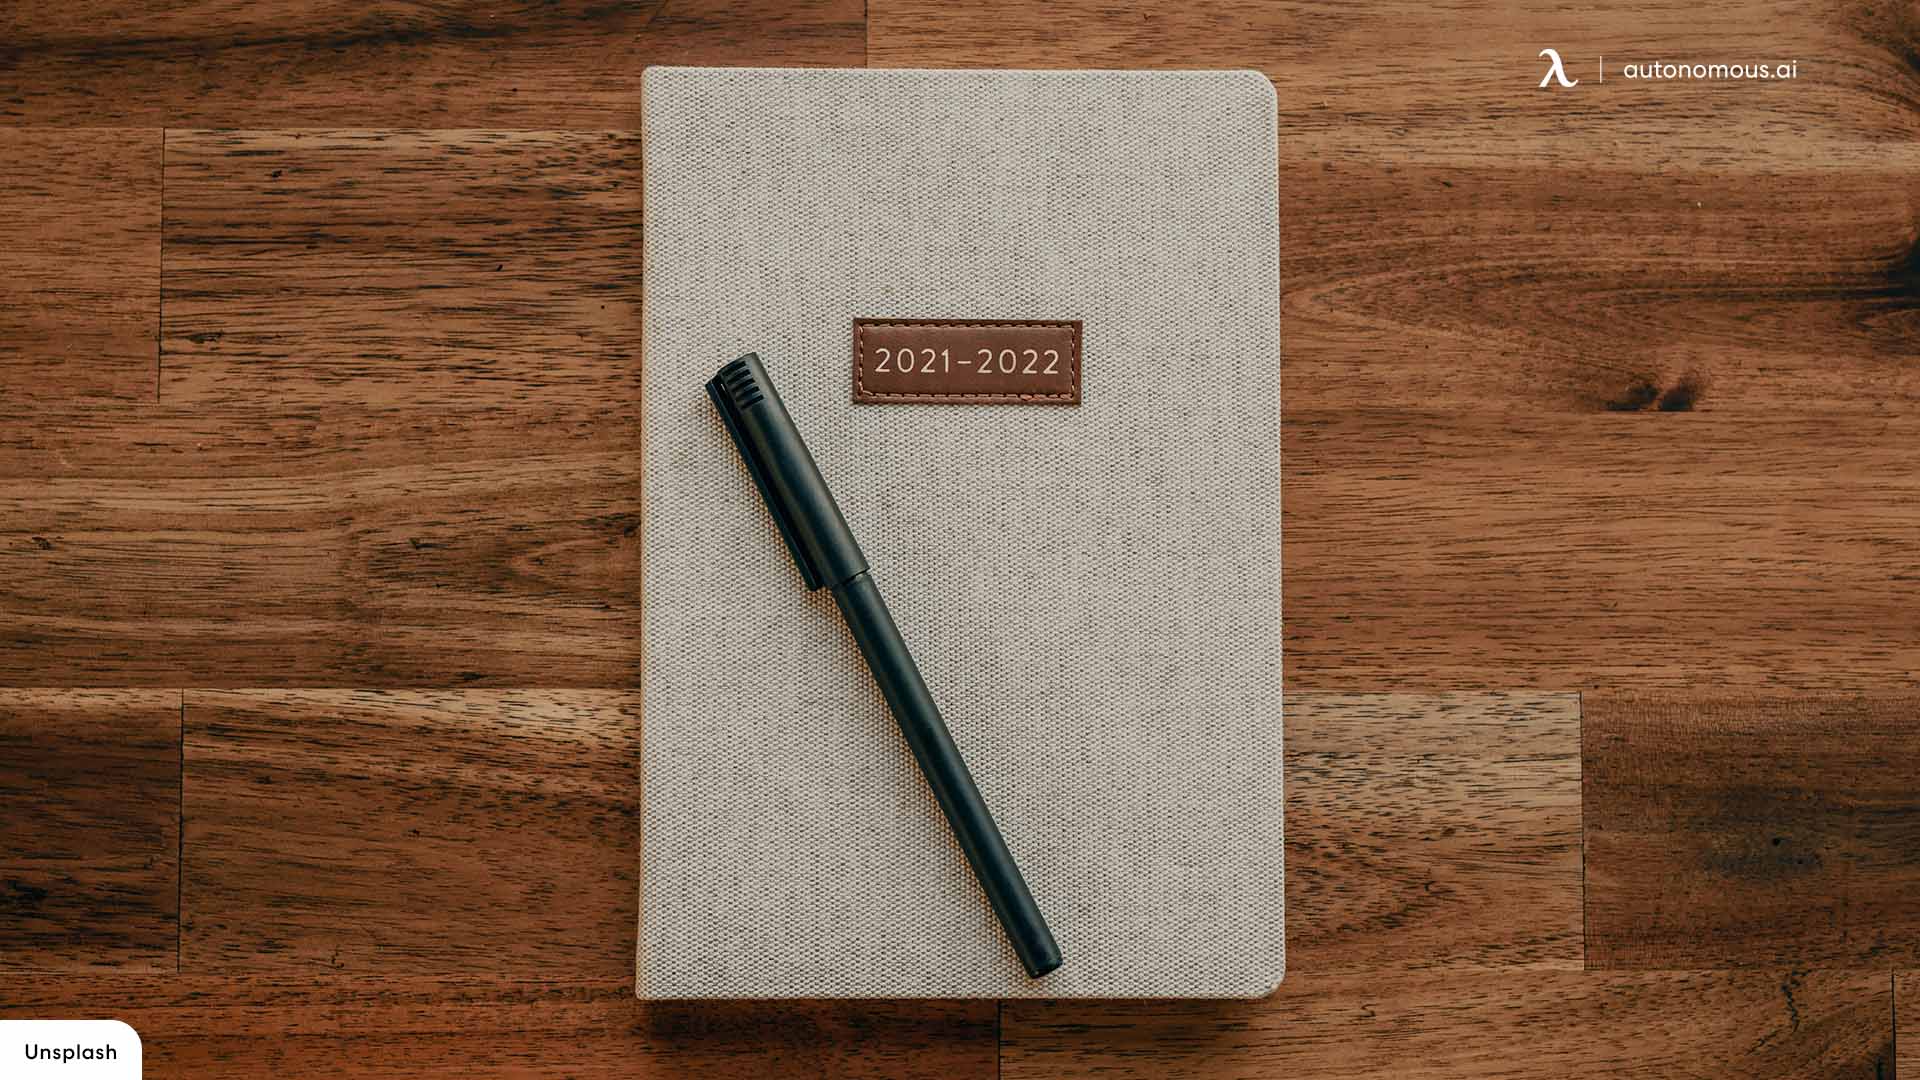 Notepad work from home essentials